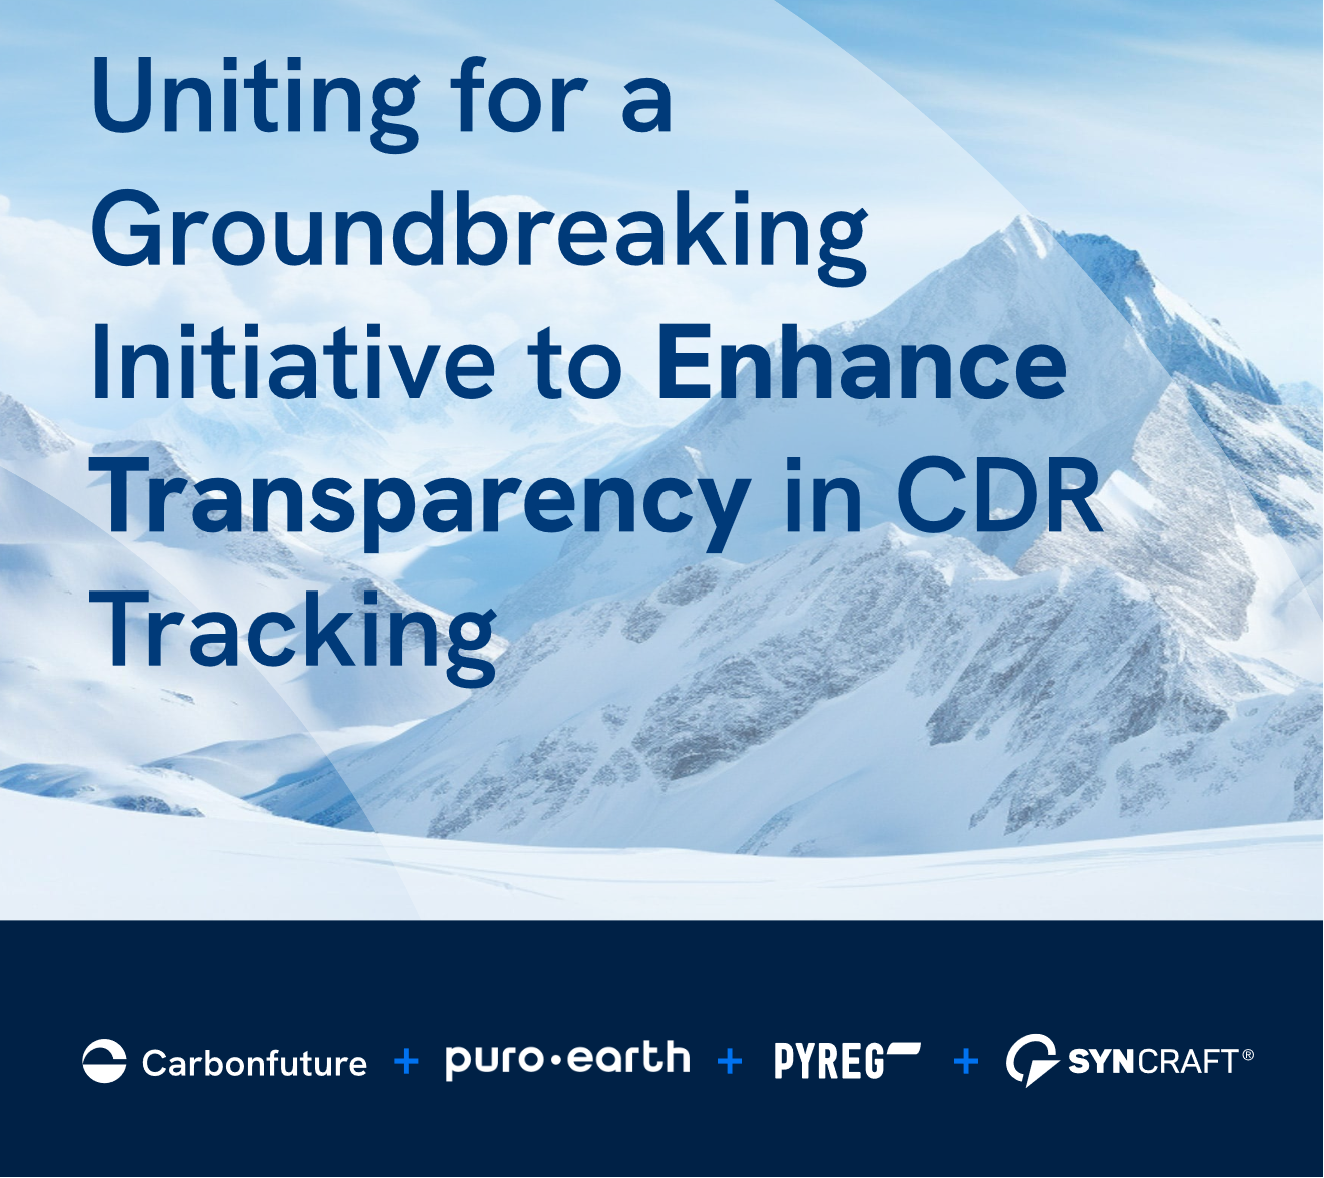 anhance transparency in CDR tracking by PYREG, cabronfuture, PURO and syncraft